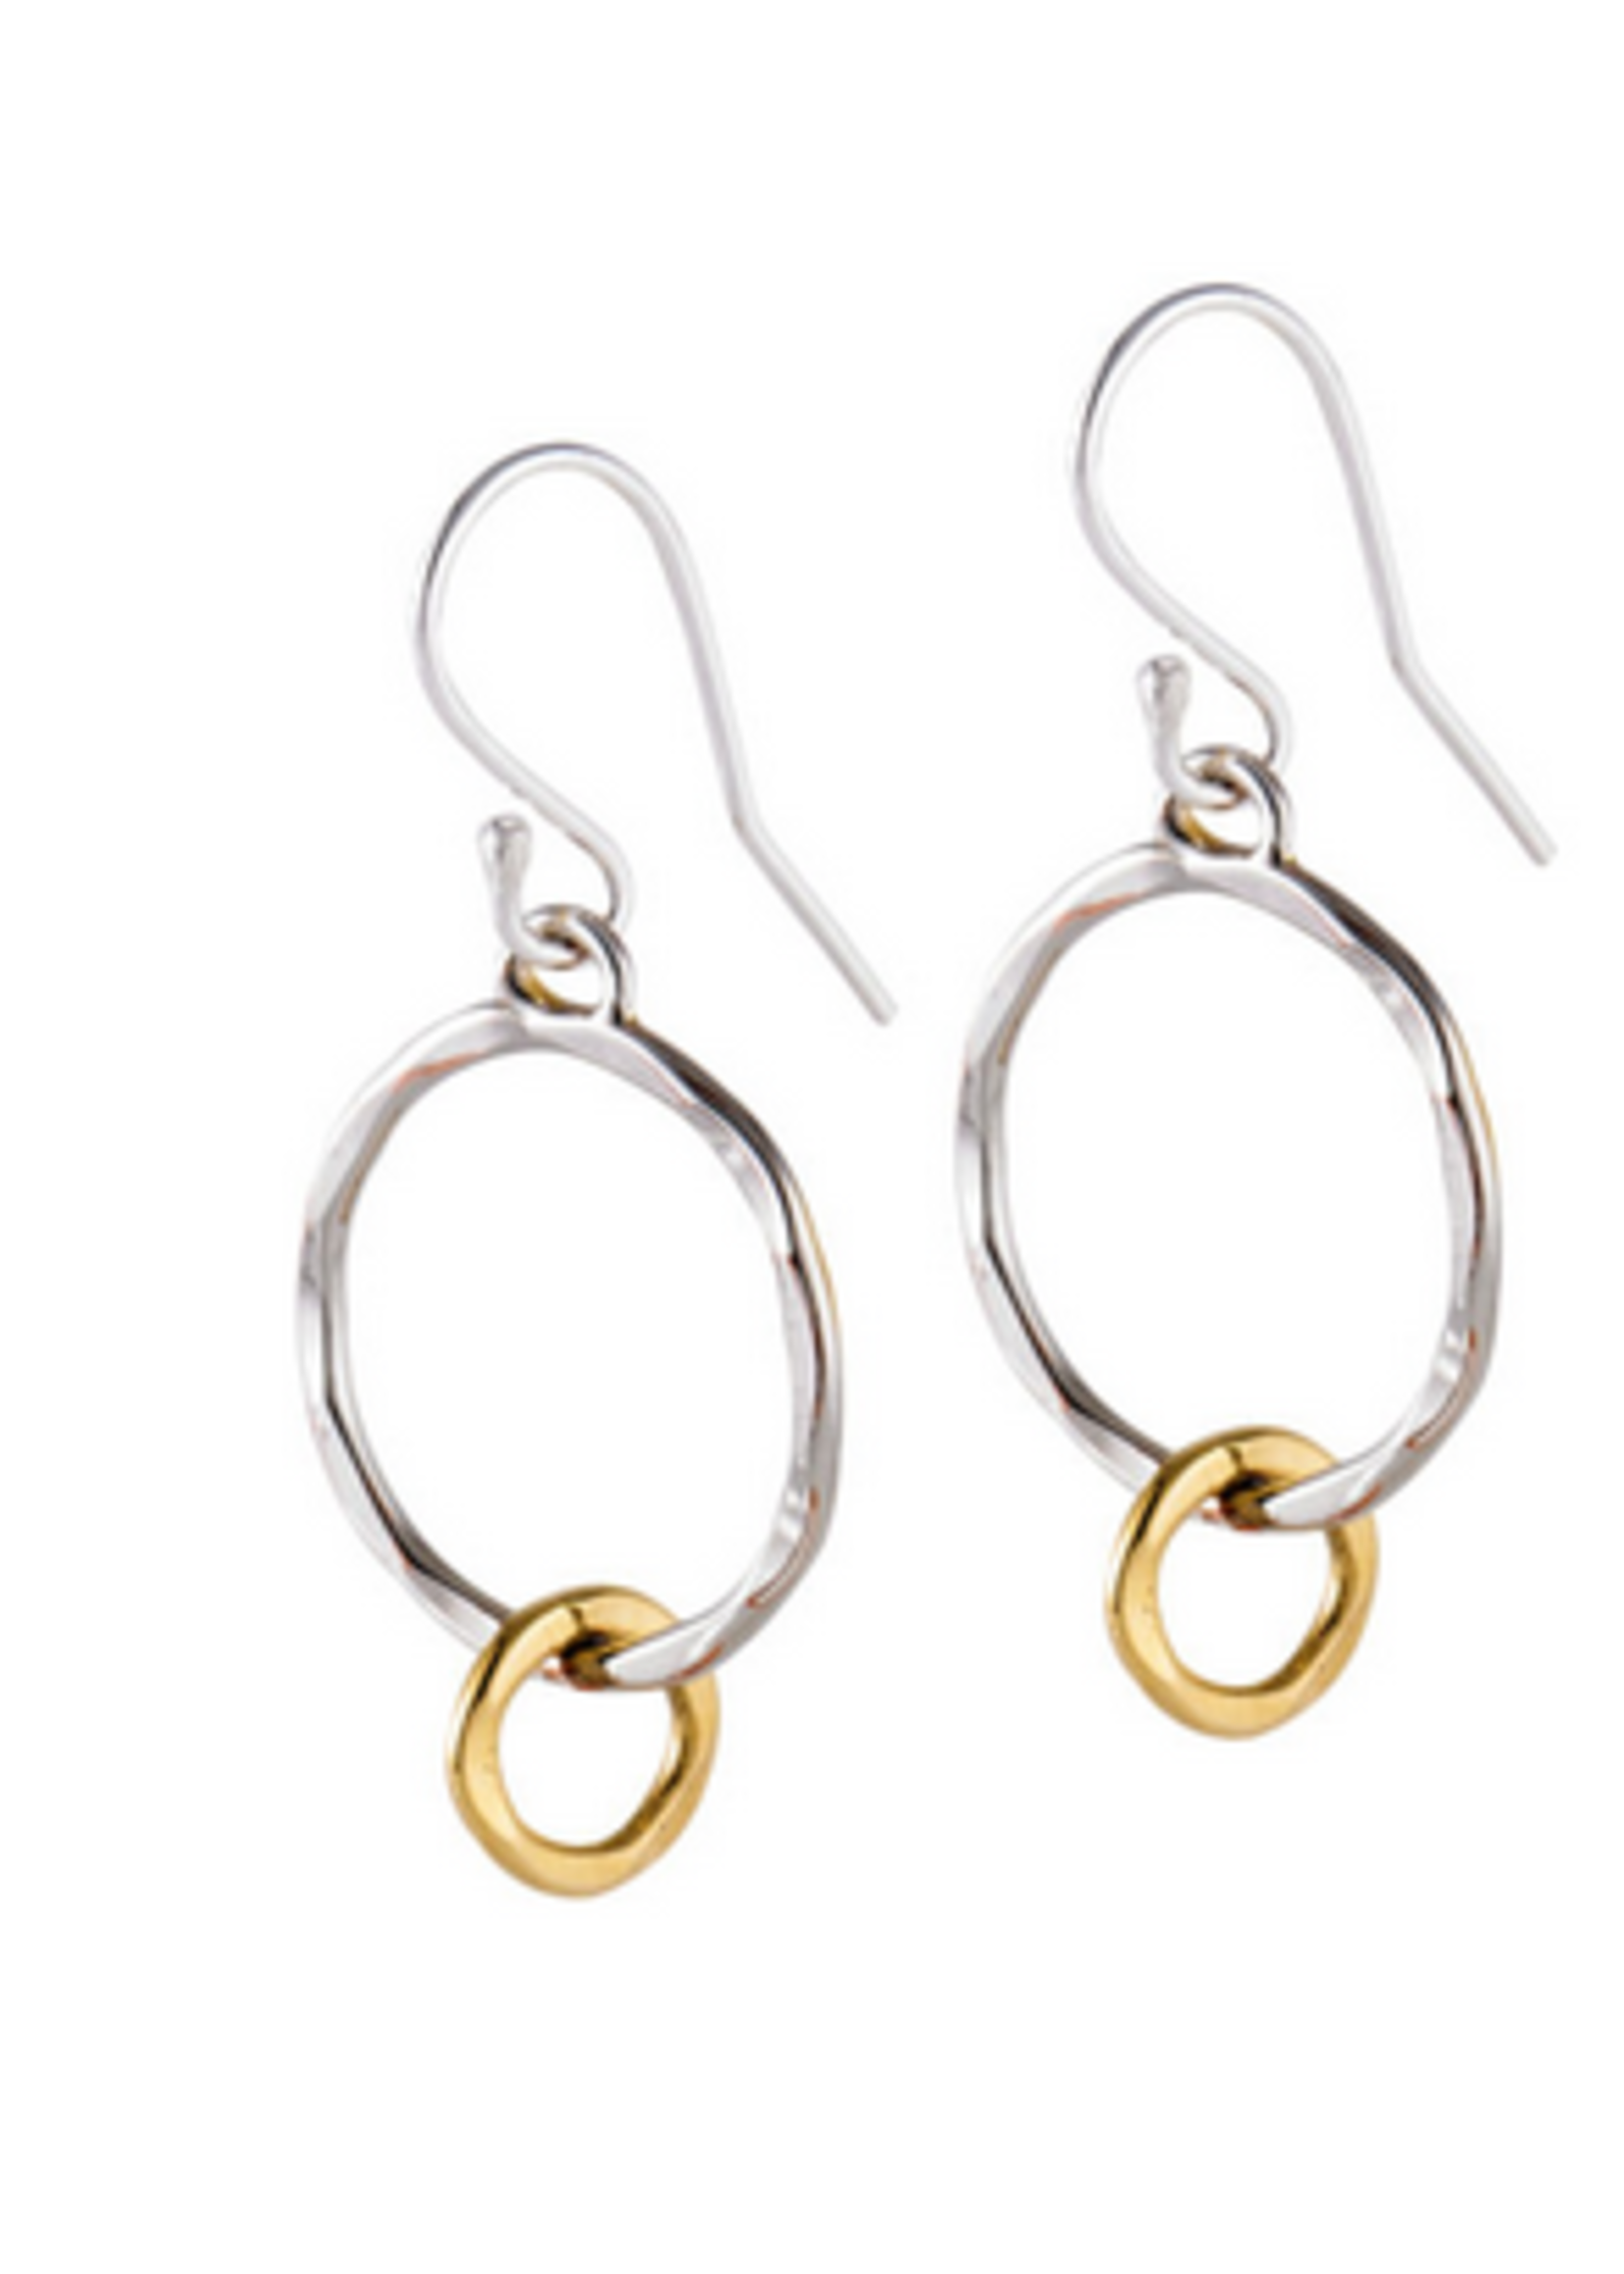 Plata Earrings Silver Circle W/ Gold Plating